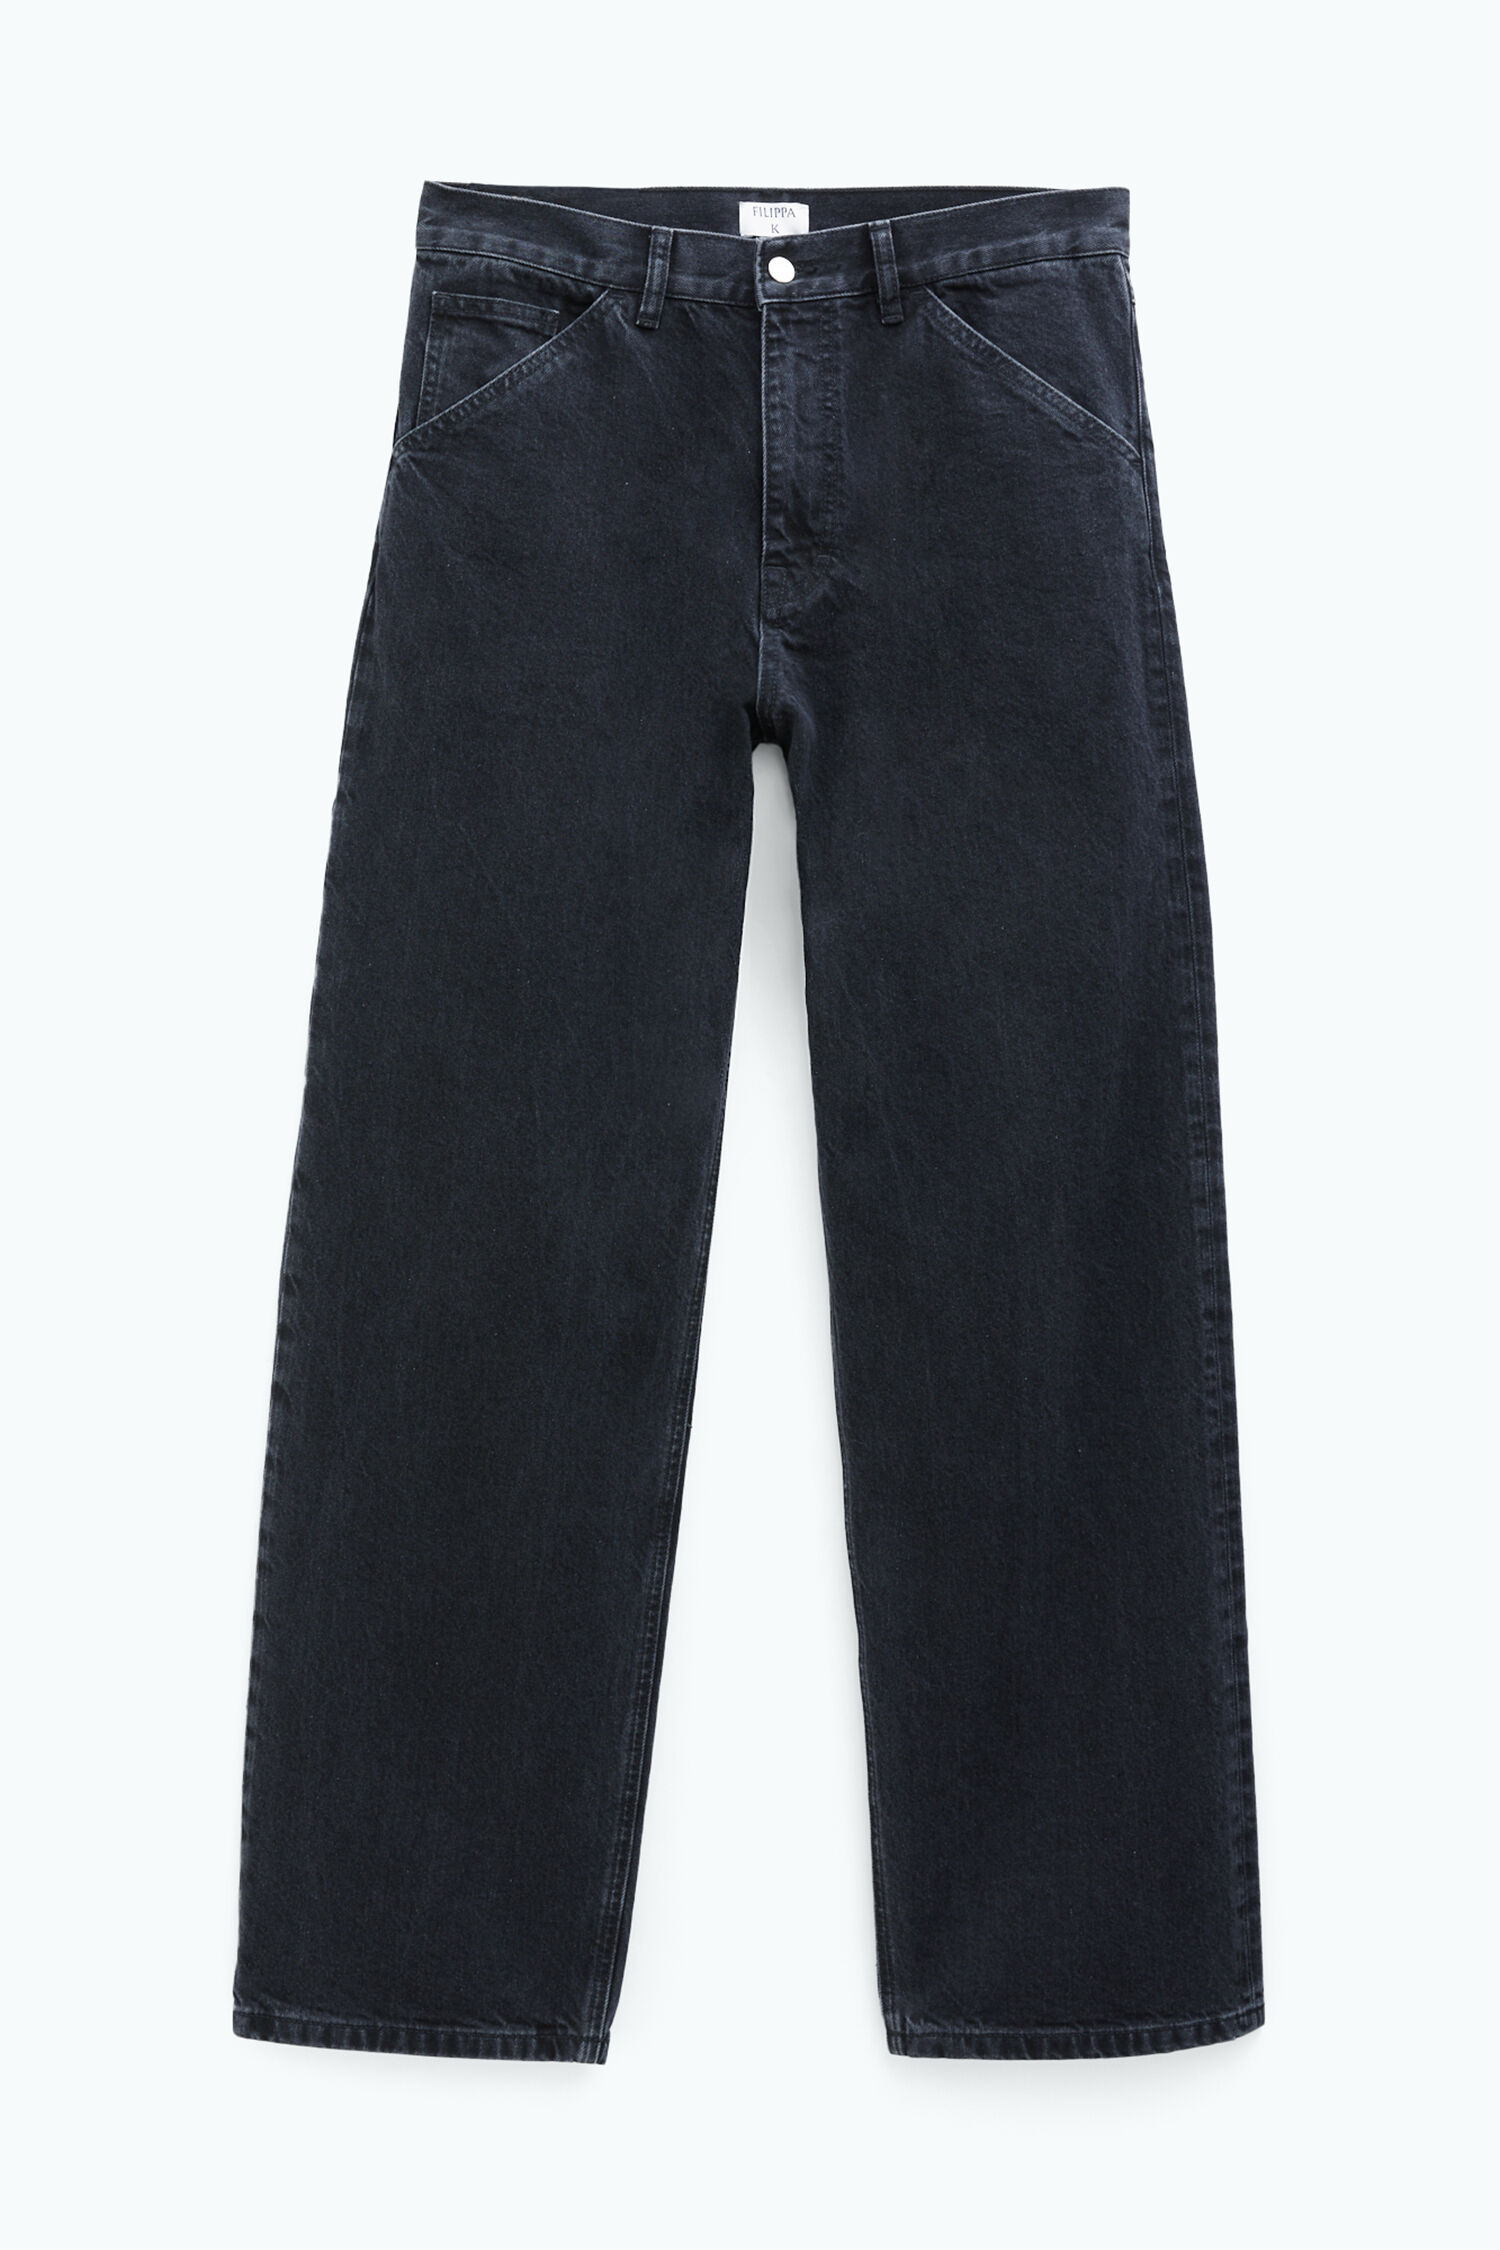 Baggy Jeans - Charcoal Black